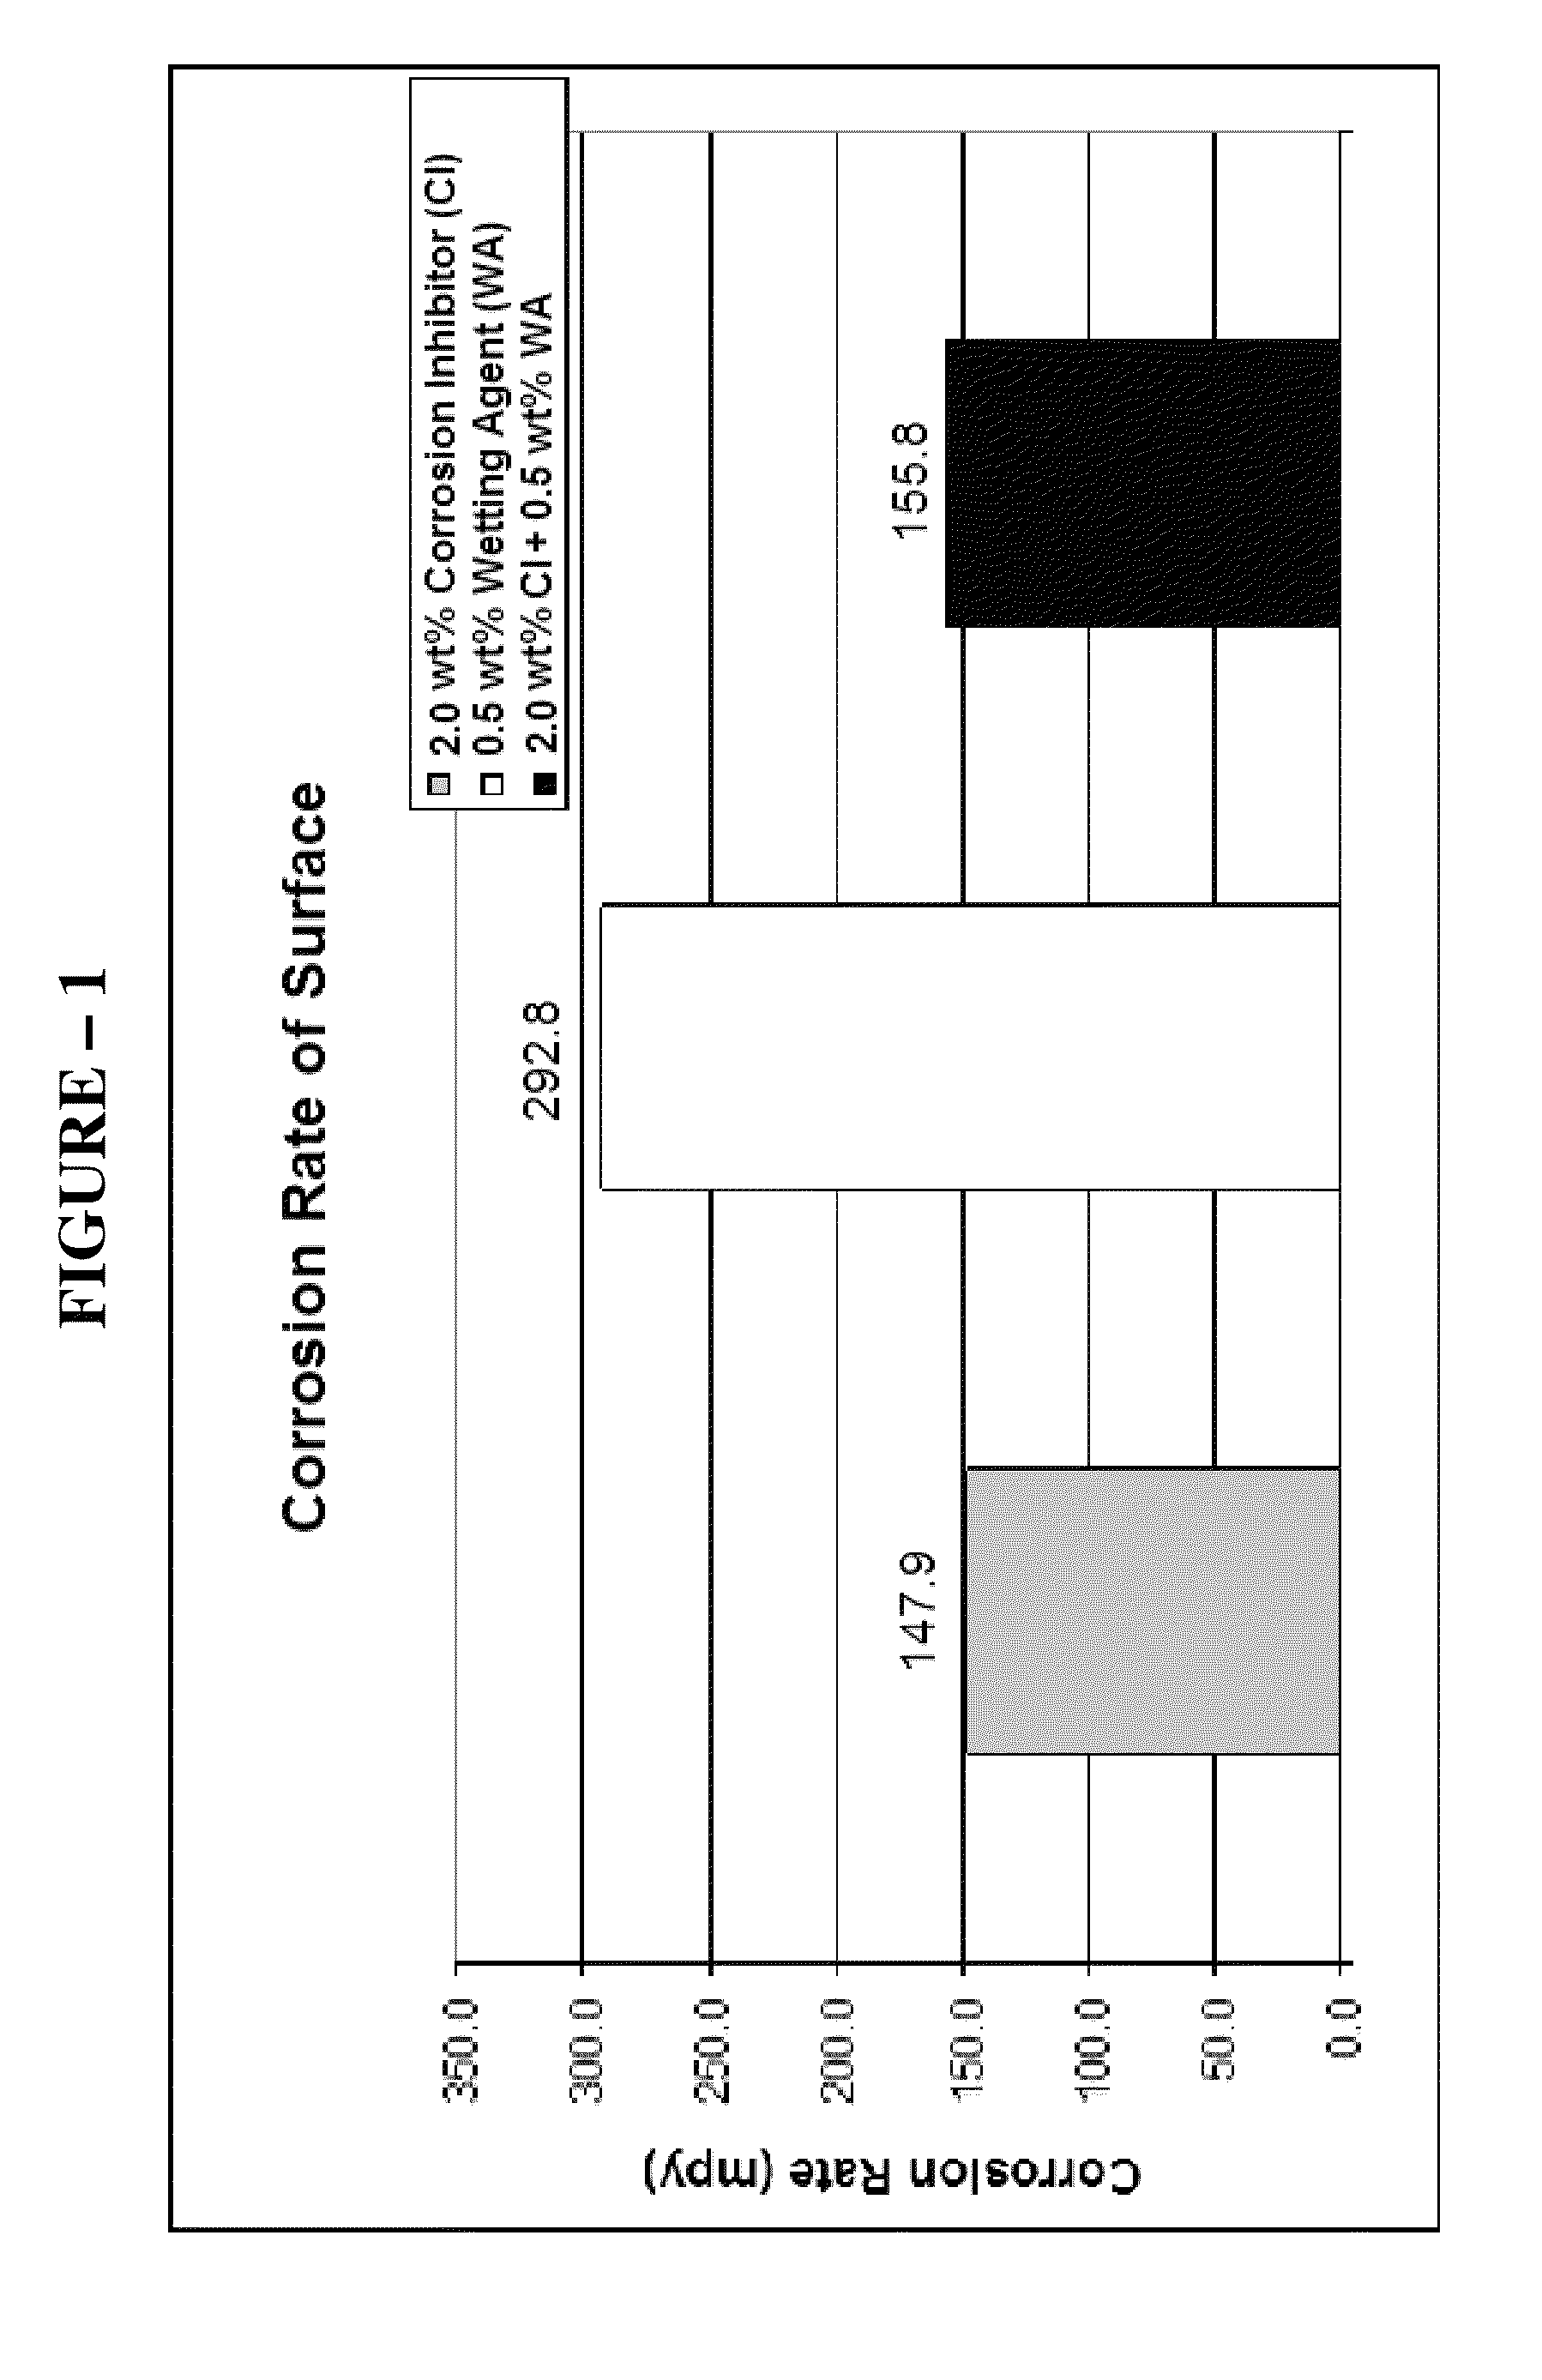 Composition comprising an alkanesulfonic acid for dissolving and/or inhibiting deposition of scale on a surface of a system